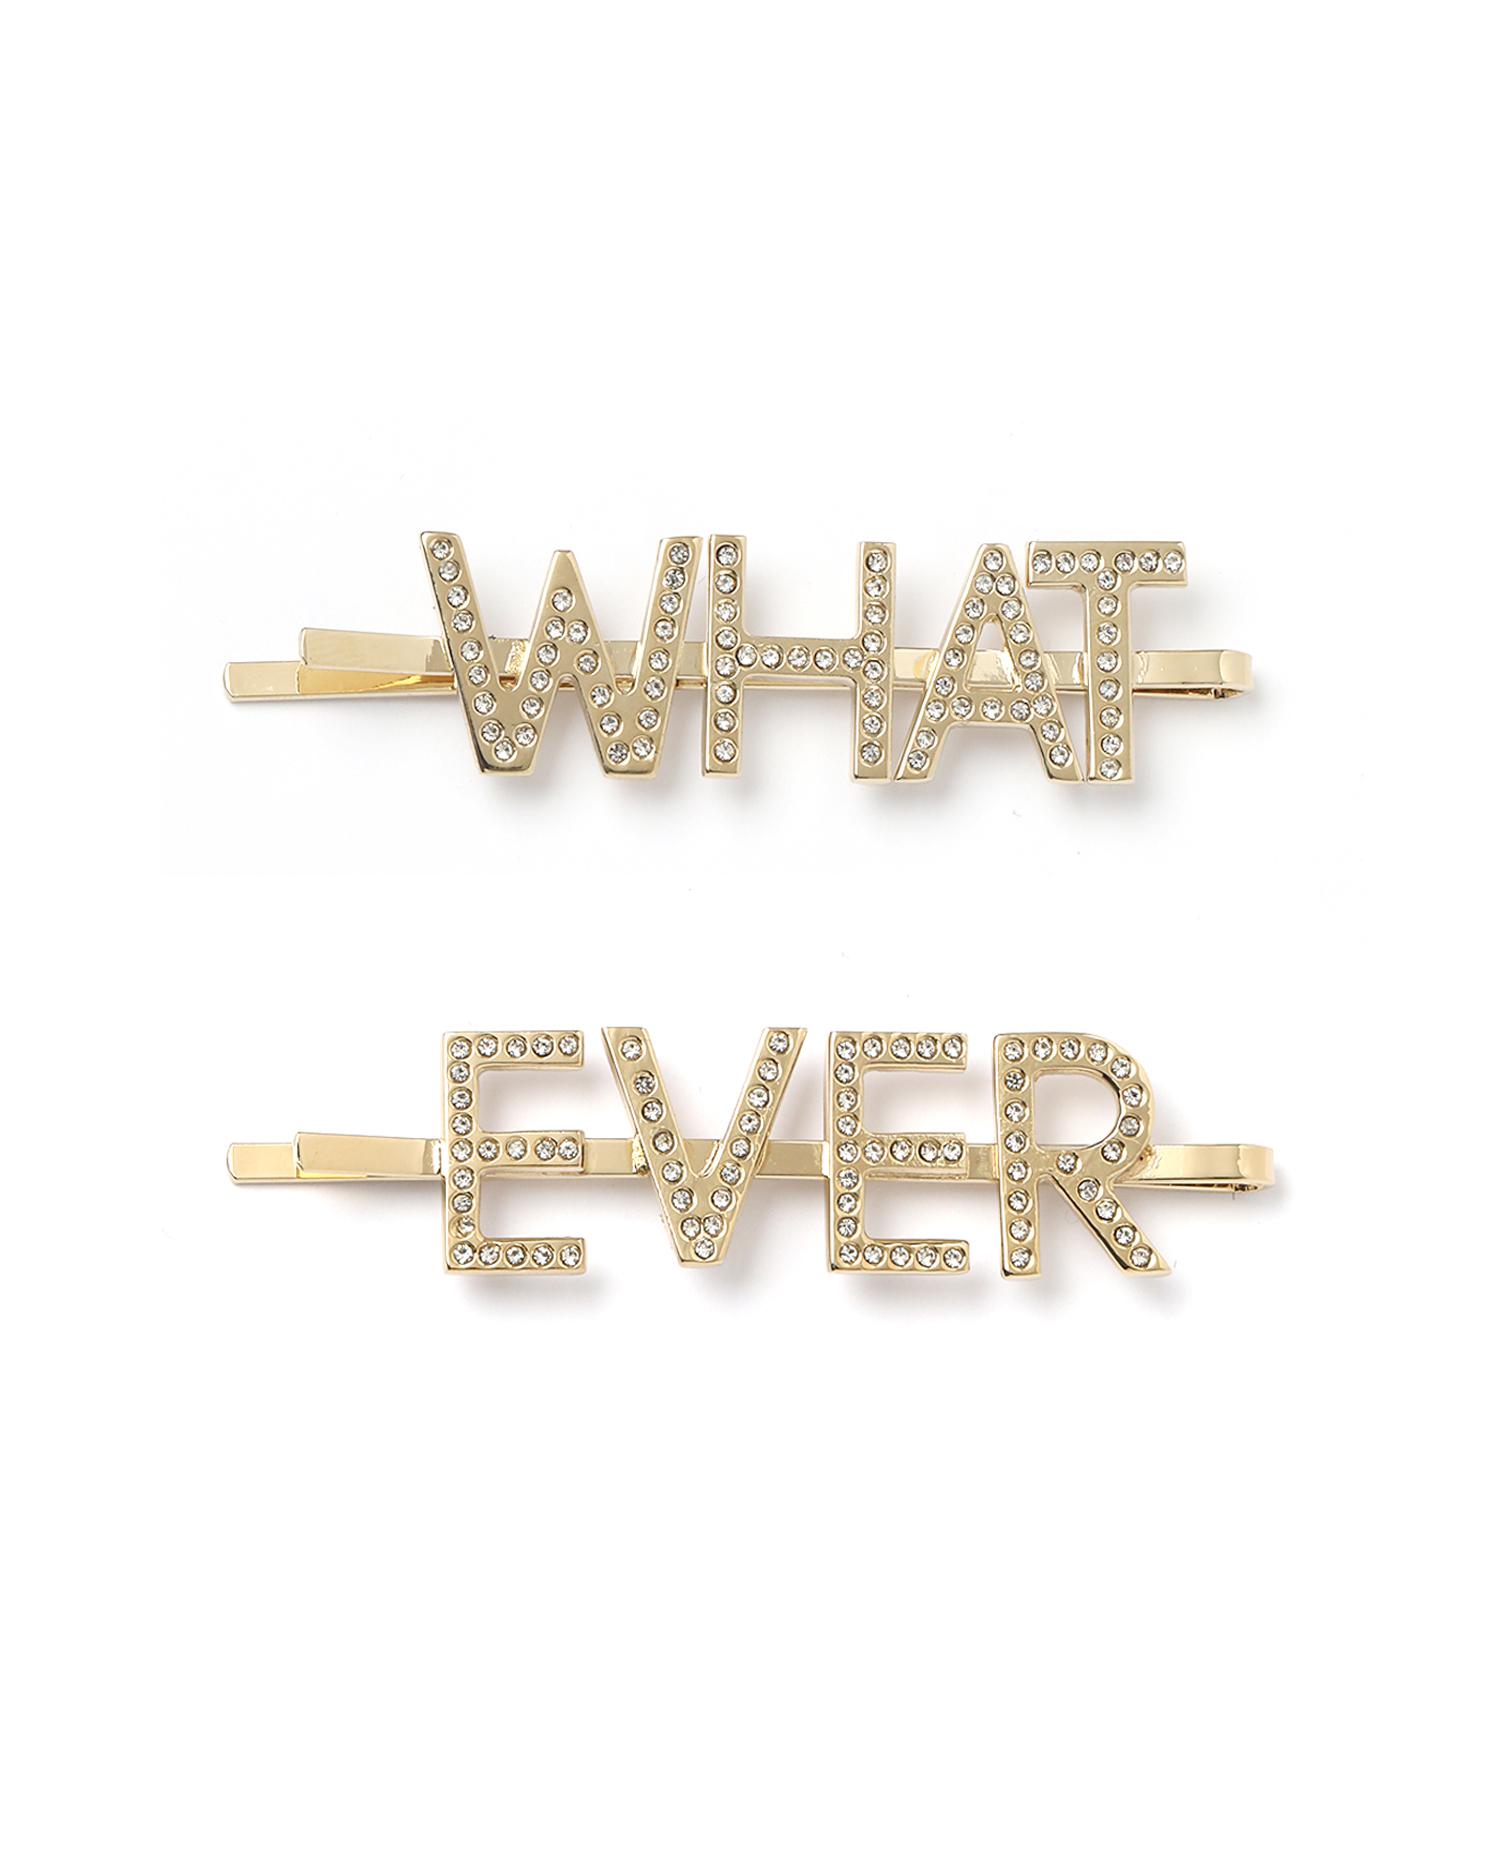 Embellished 'WHATEVER' hair pins by BIJOUX DE FAMILLE